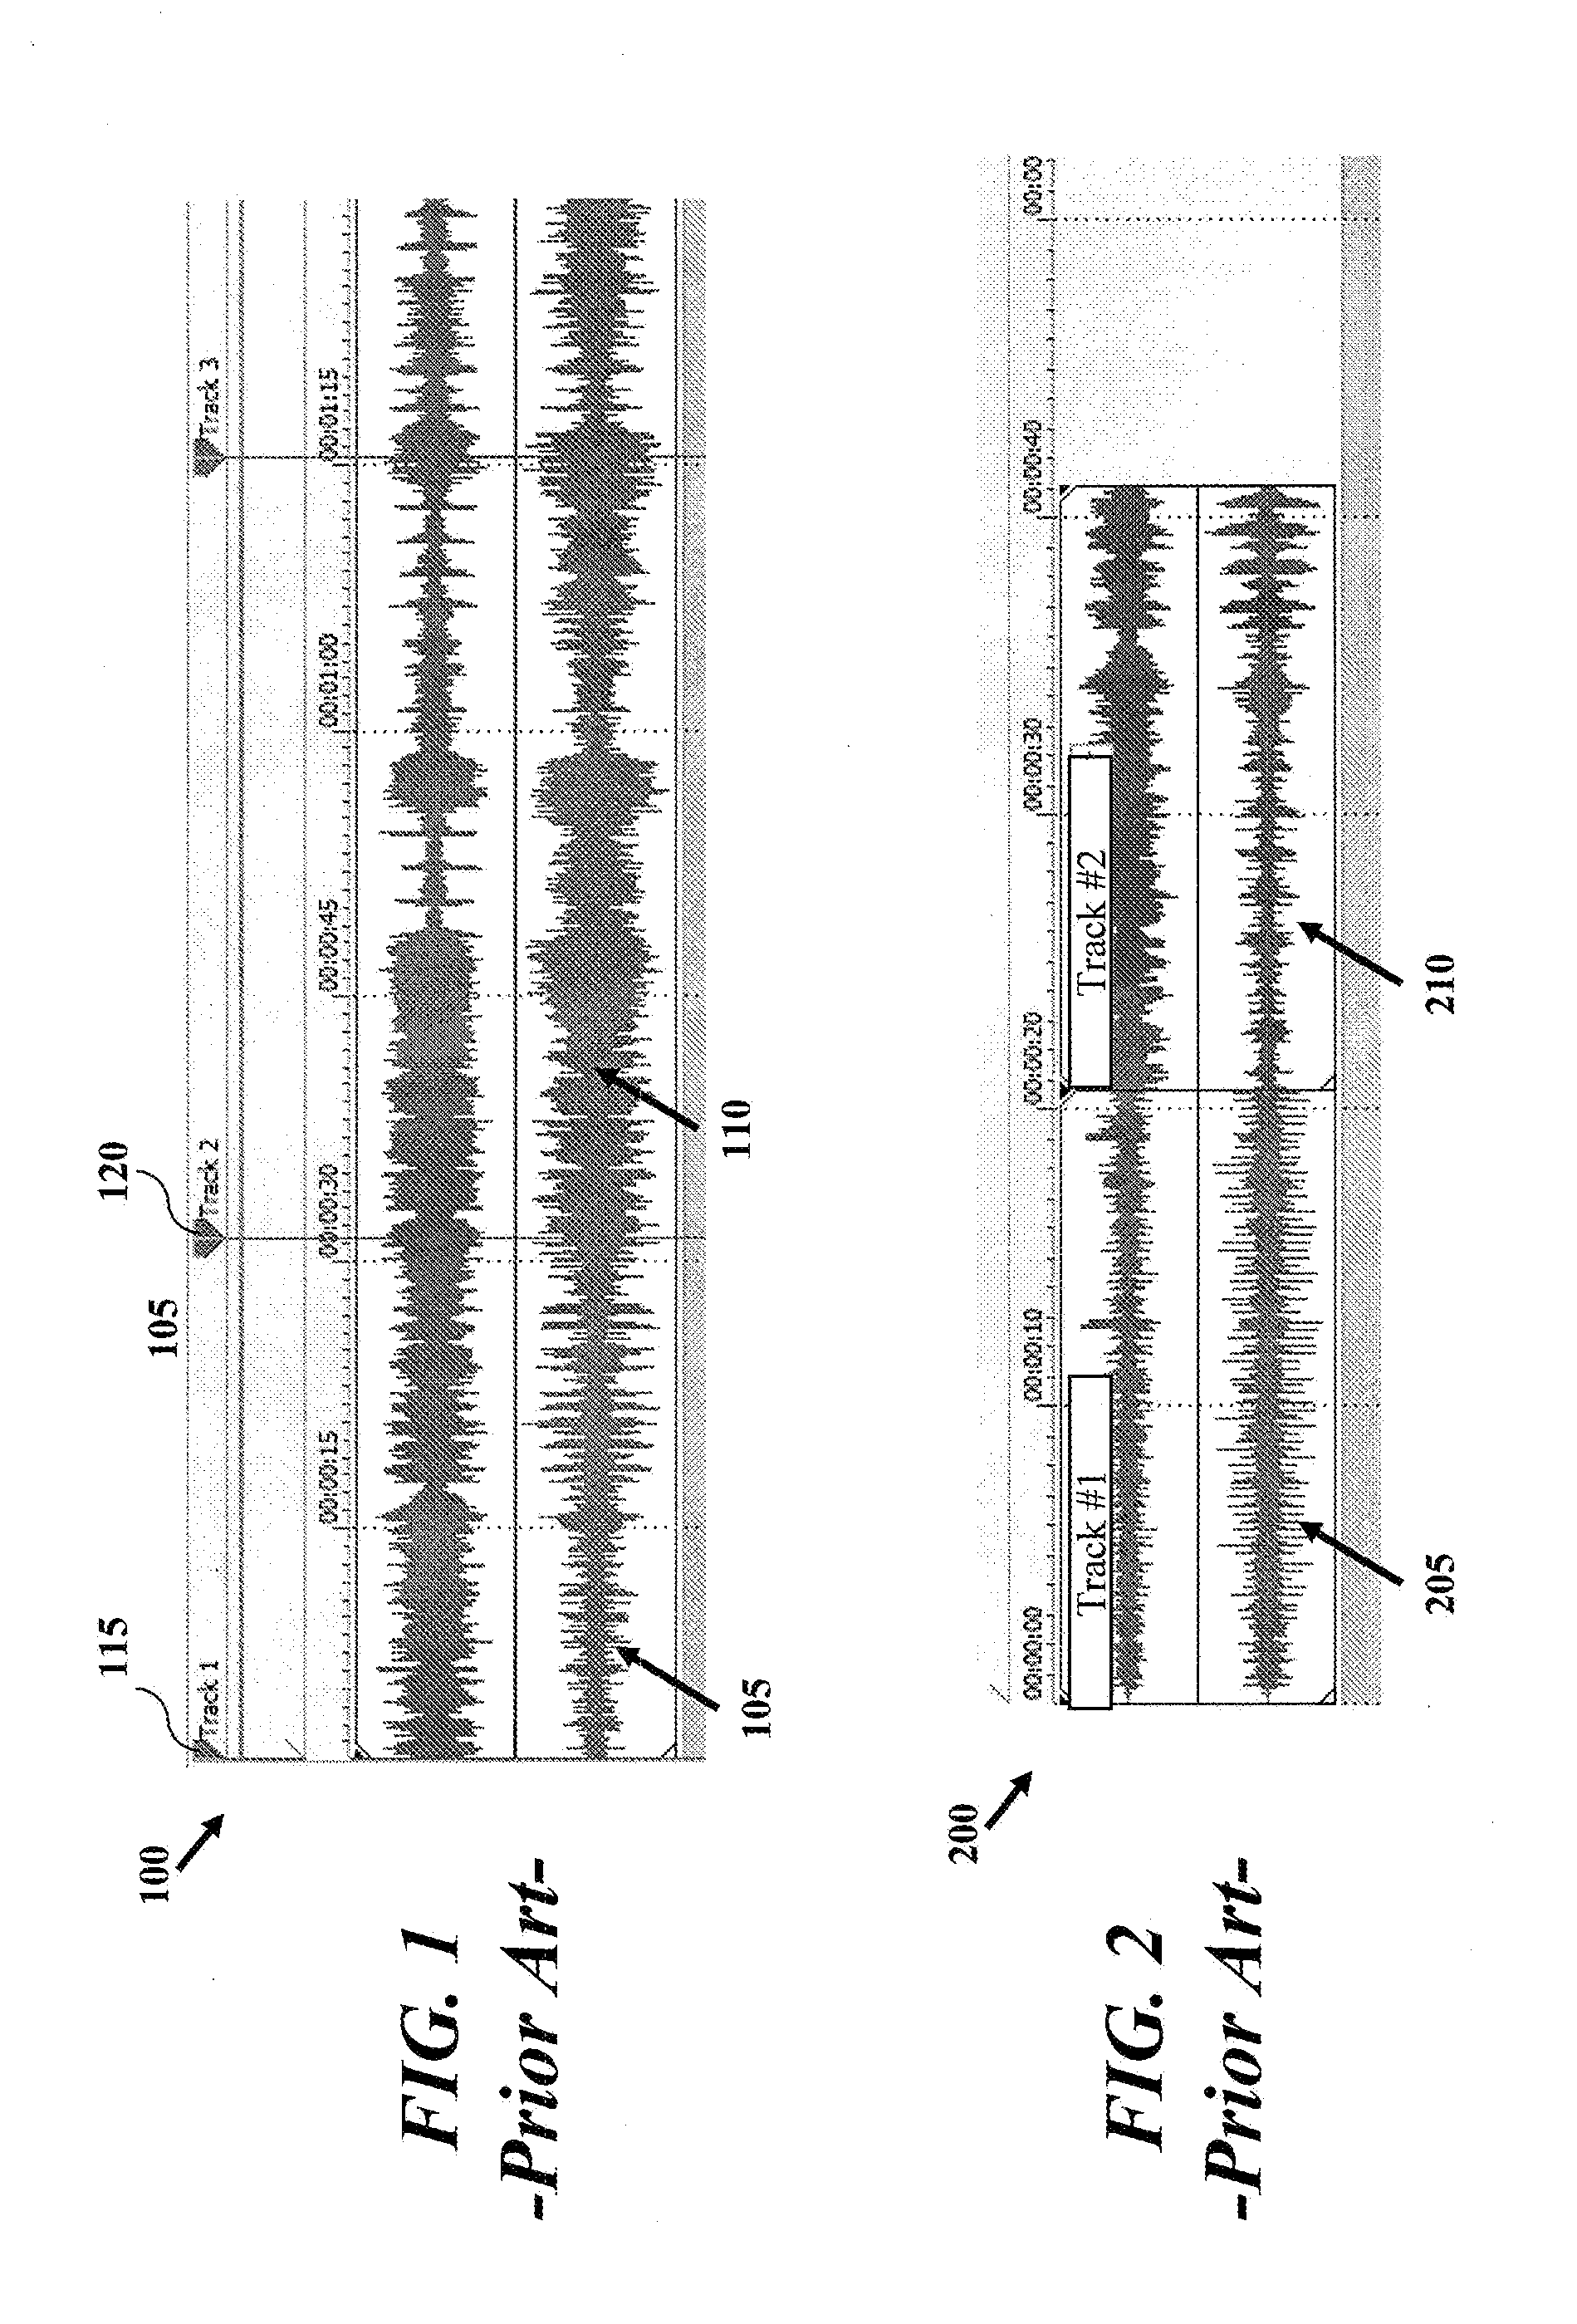 Method and apparatus for seamless playback of media